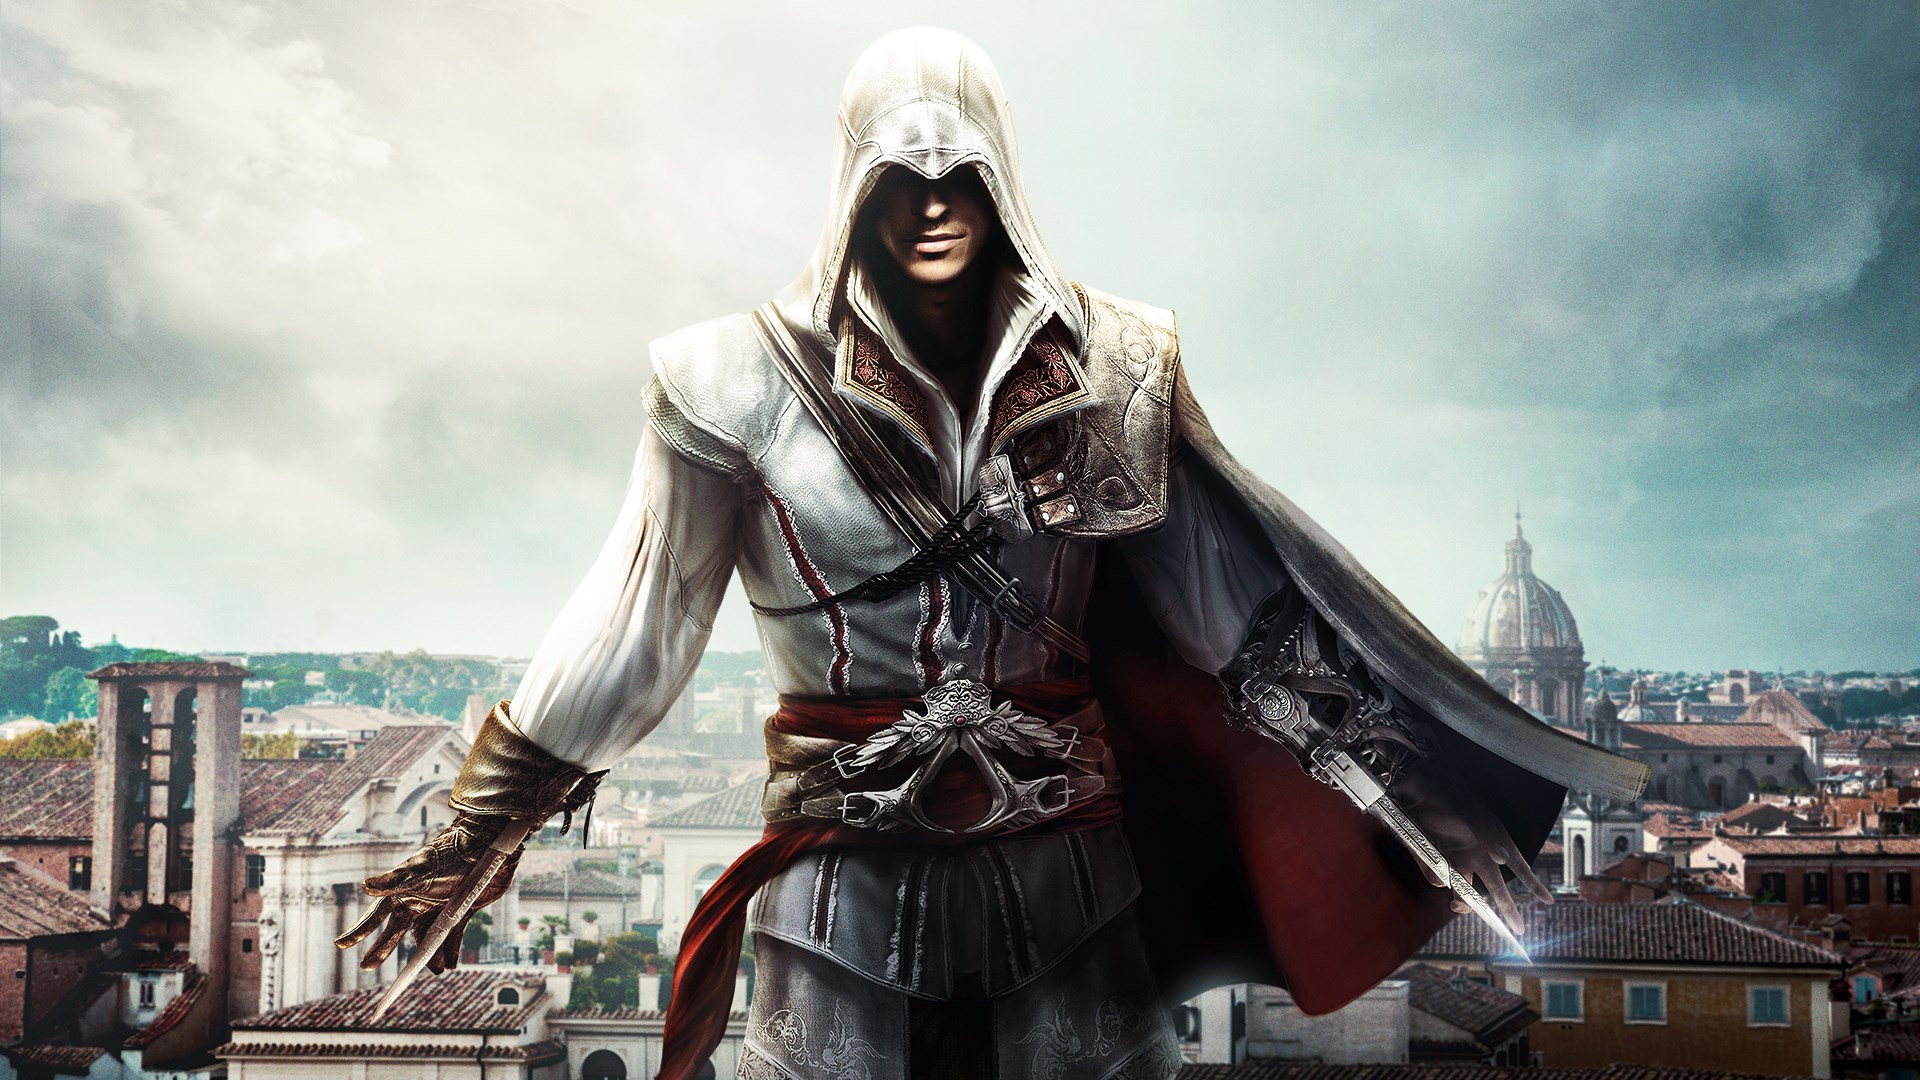 Will Assassin’s Creed Have a Game Set in the Aztec Empire?